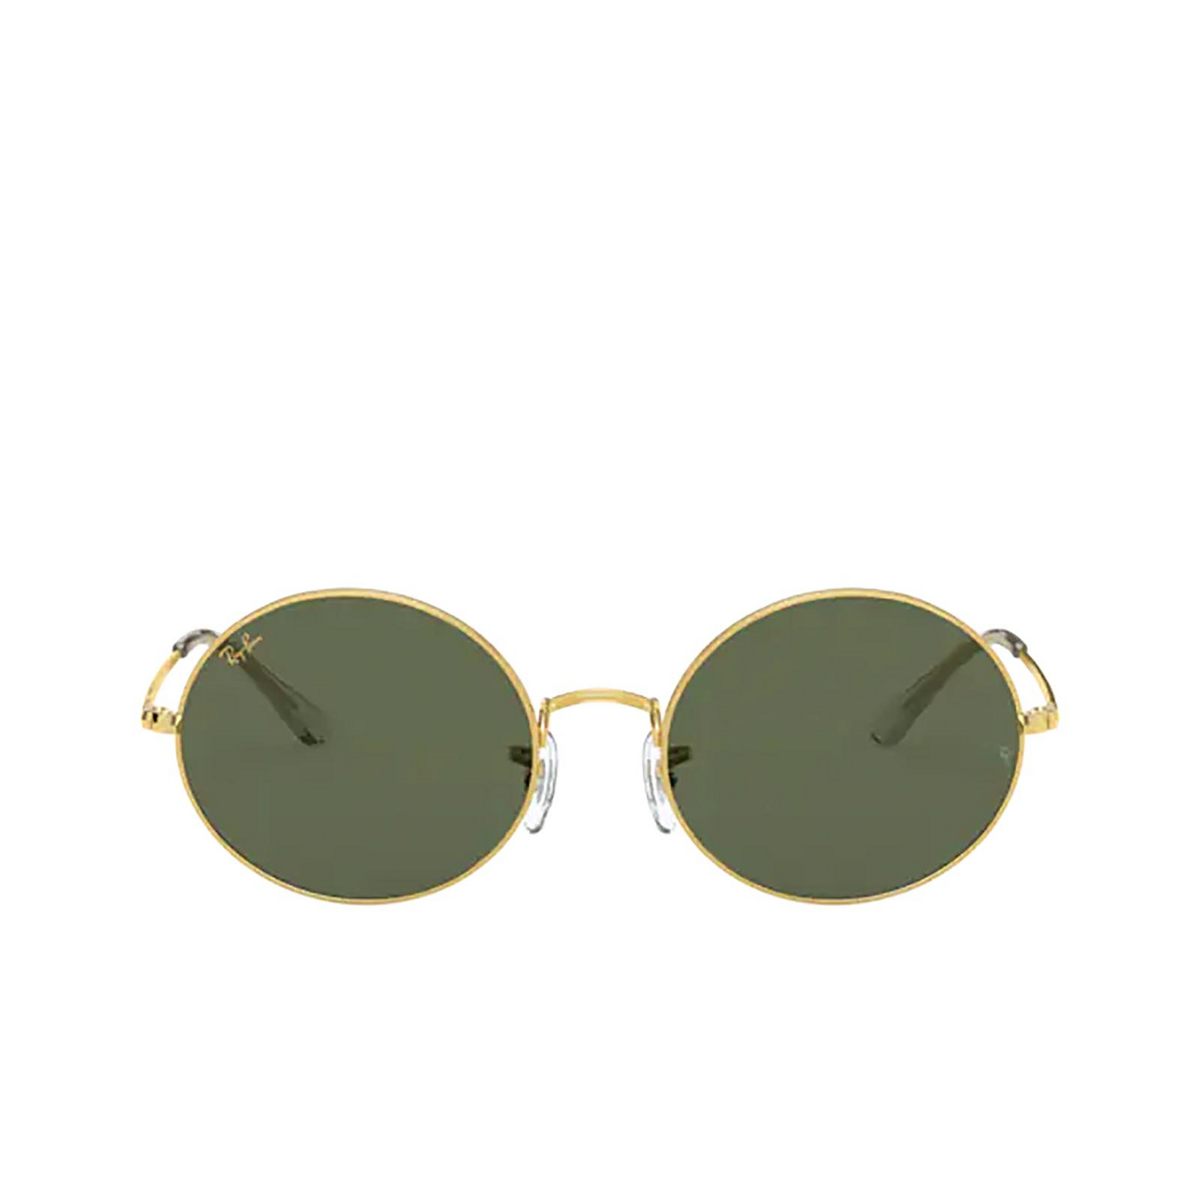 Ray-Ban® Sunglasses: Oval RB1970 color Legend Gold 919631 - front view.